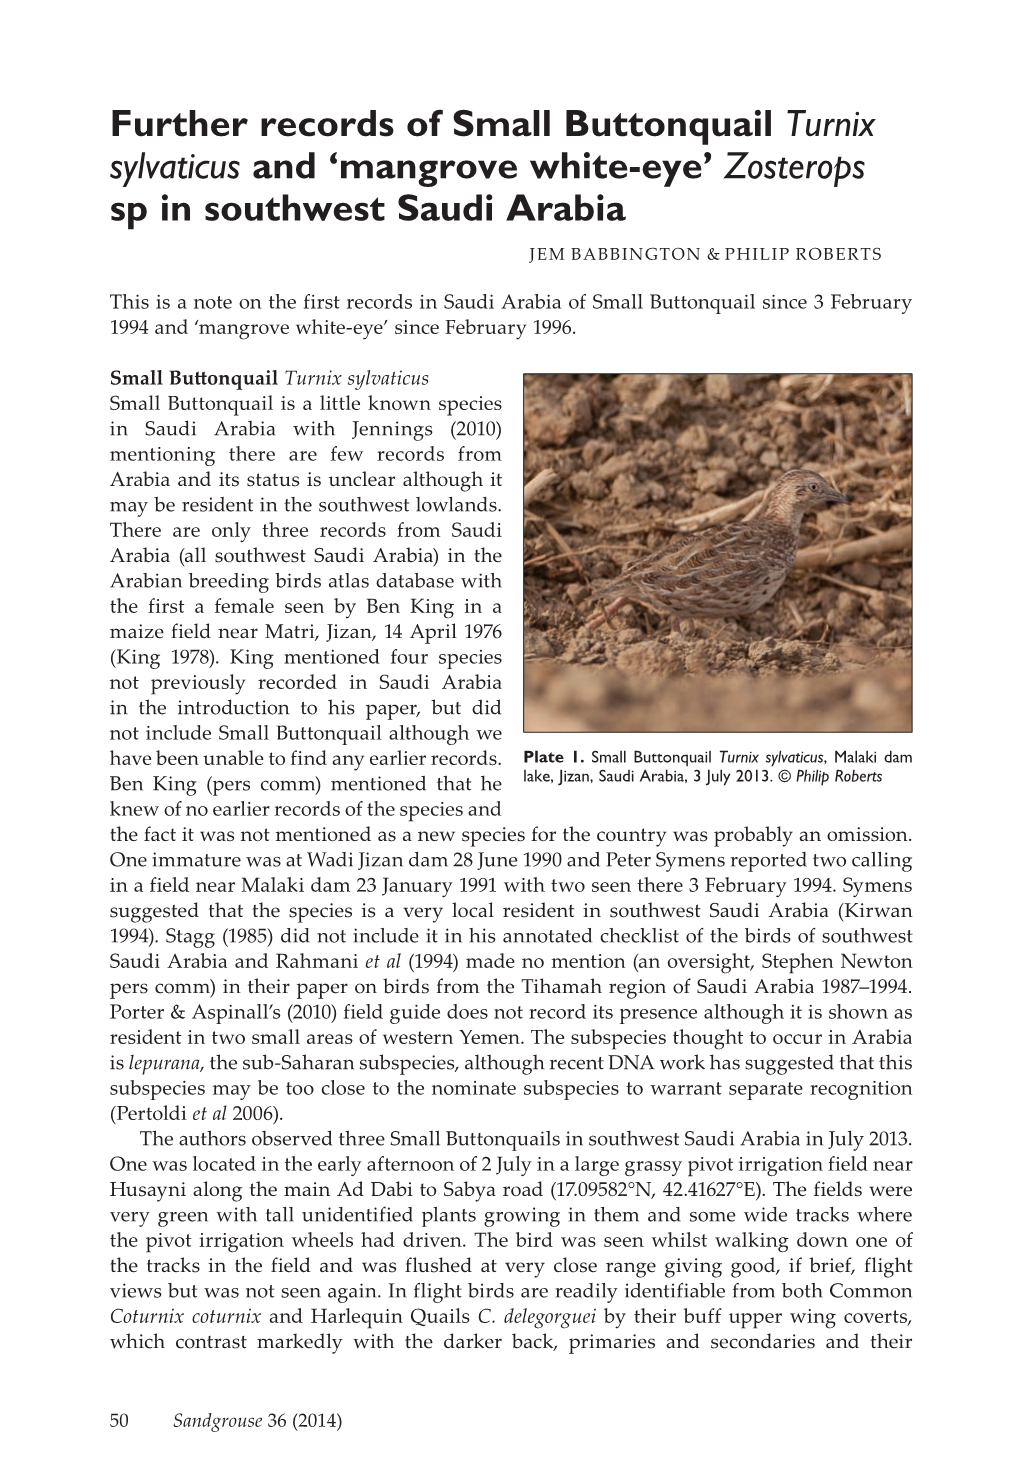 Further Records of Small Buttonquail Turnix Sylvaticus and 'Mangrove White-Eye' Zosterops Sp in Southwest Saudi Arabia